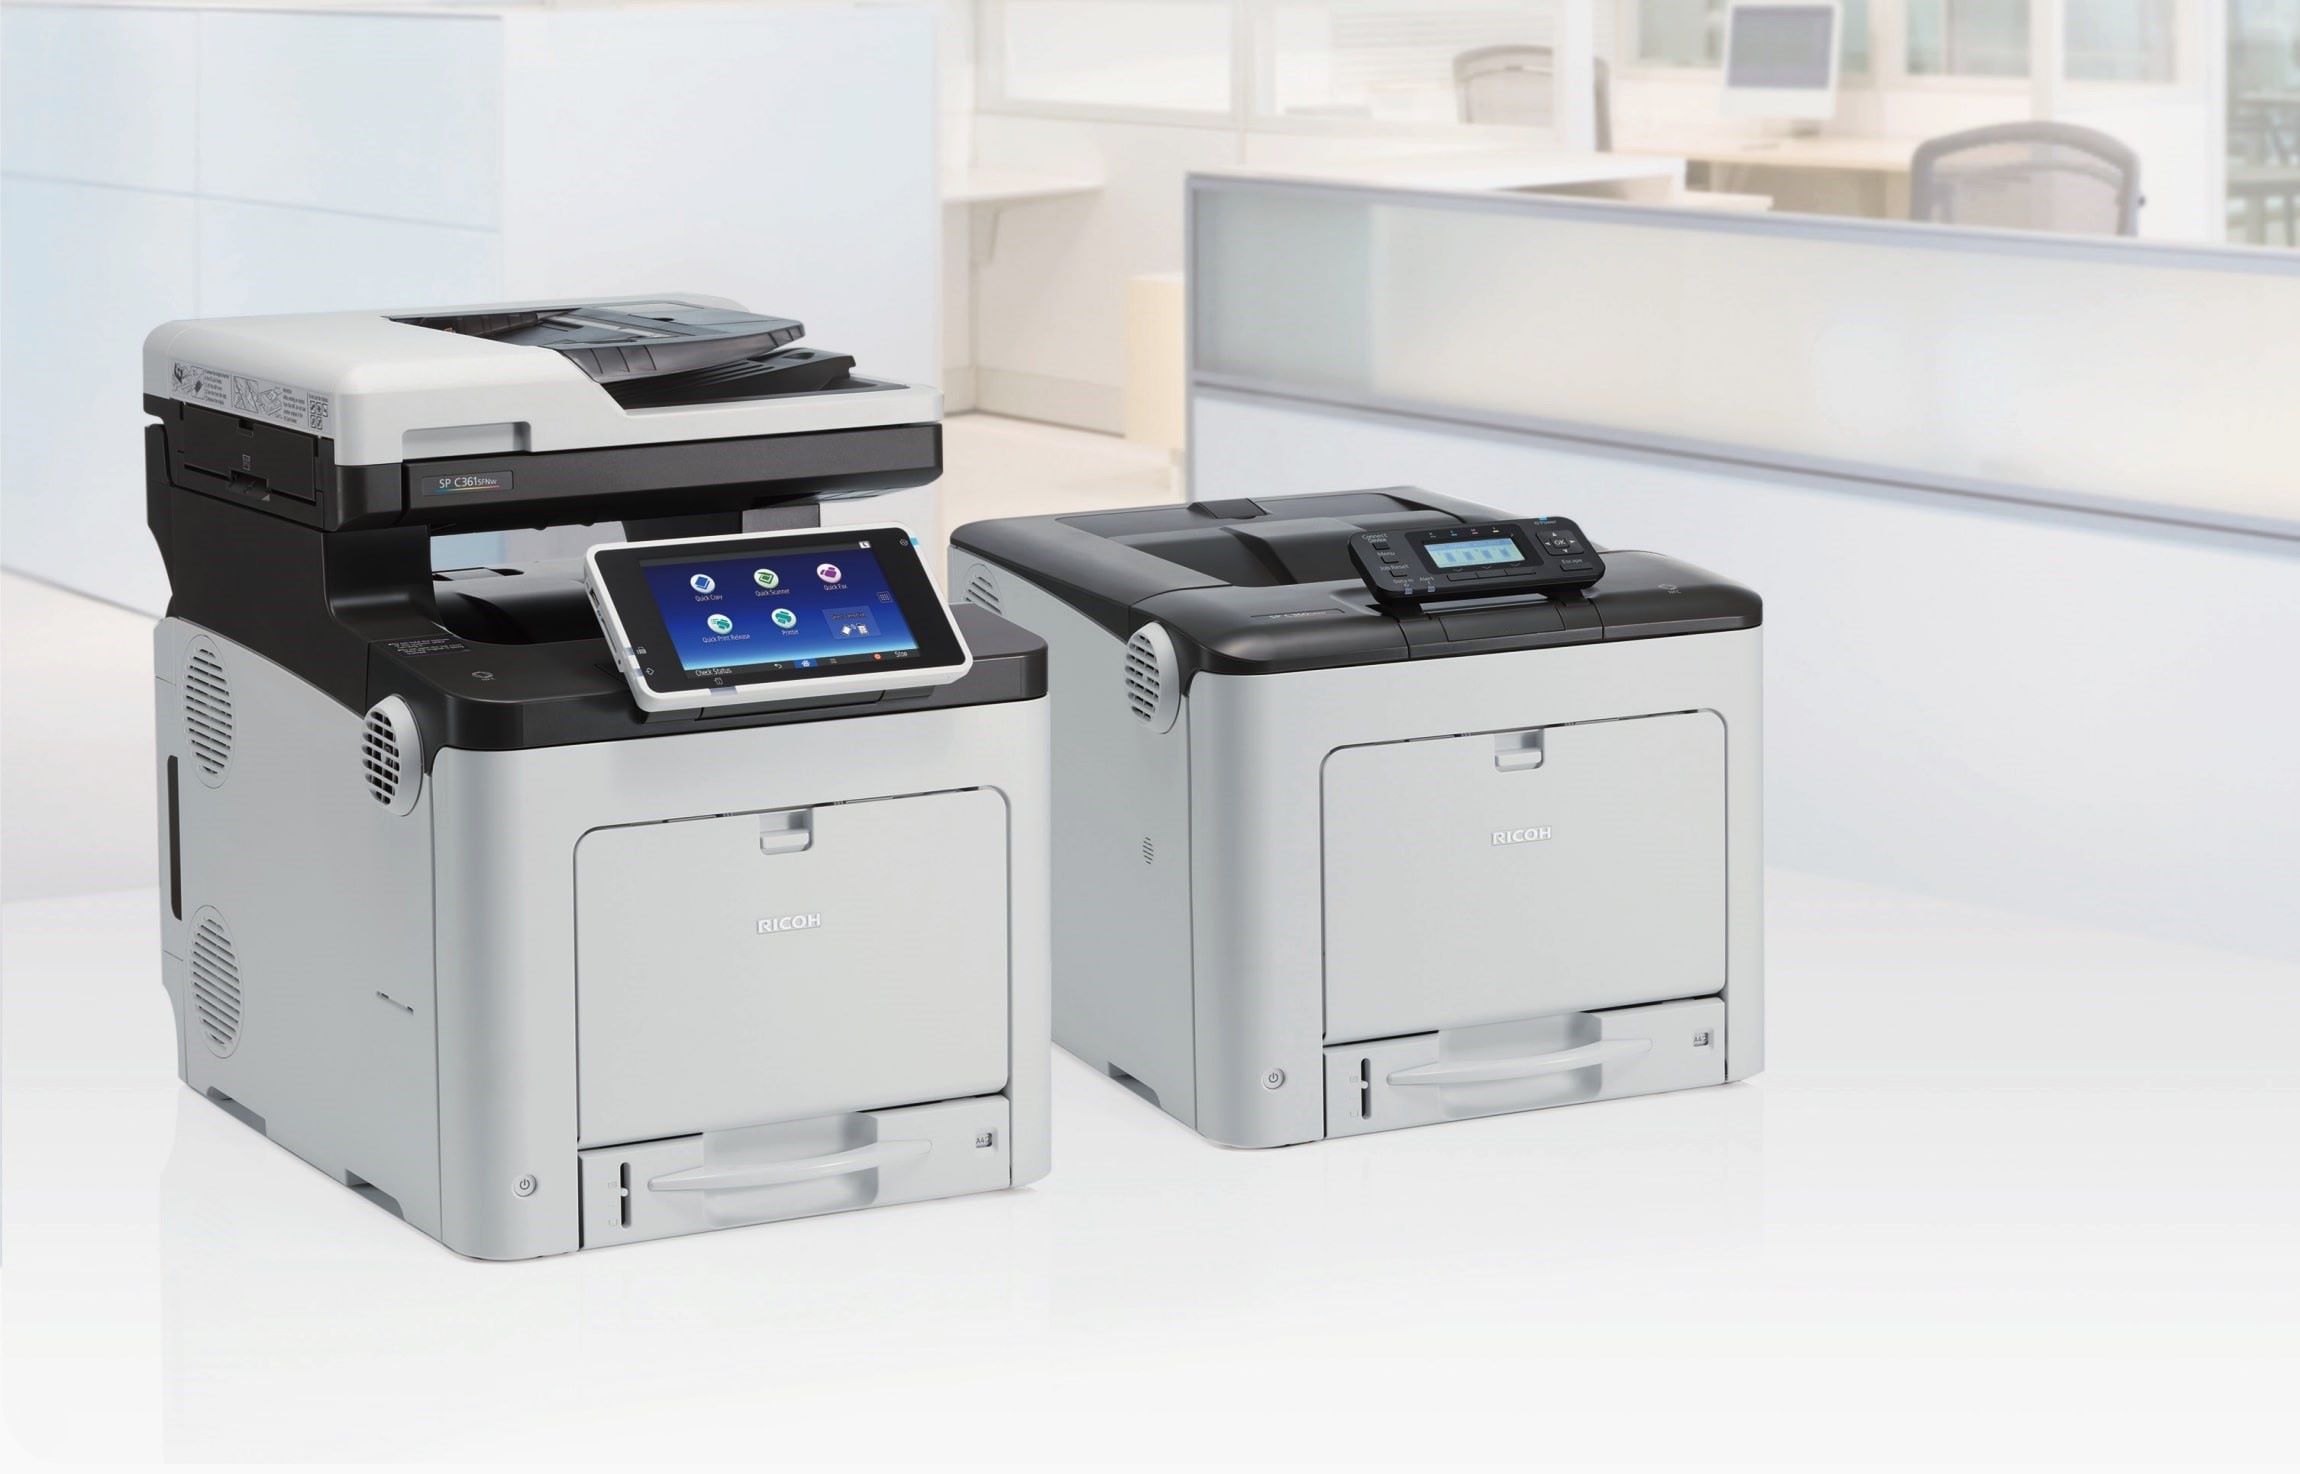 What Is The Difference Between An Inkjet Printer And A Laser Printer?